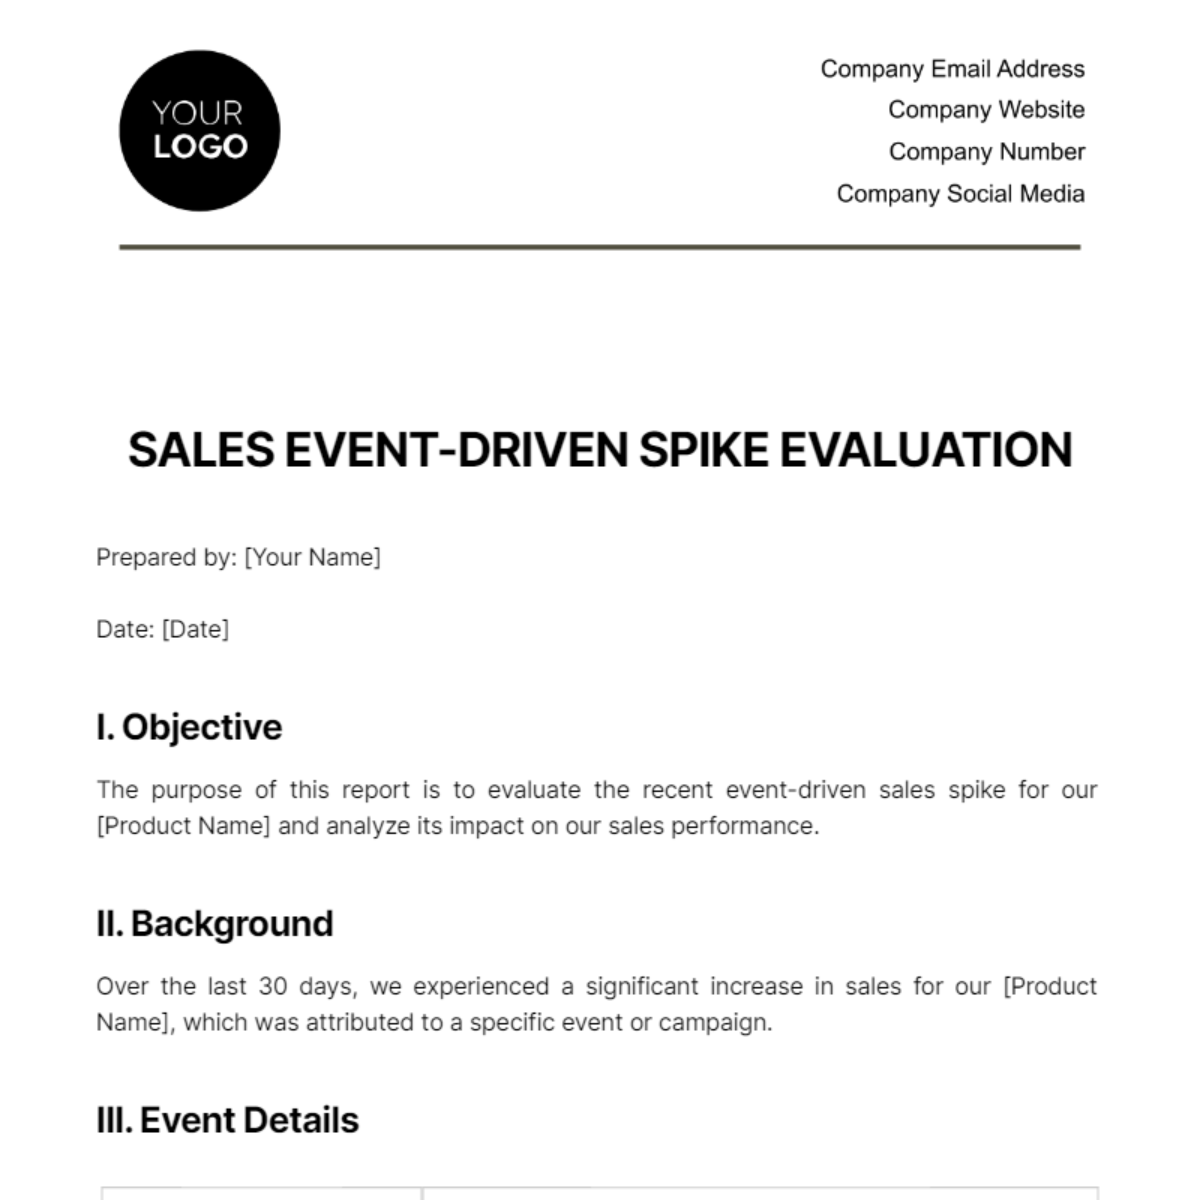 Free Sales Event-Driven Spike Evaluation Template